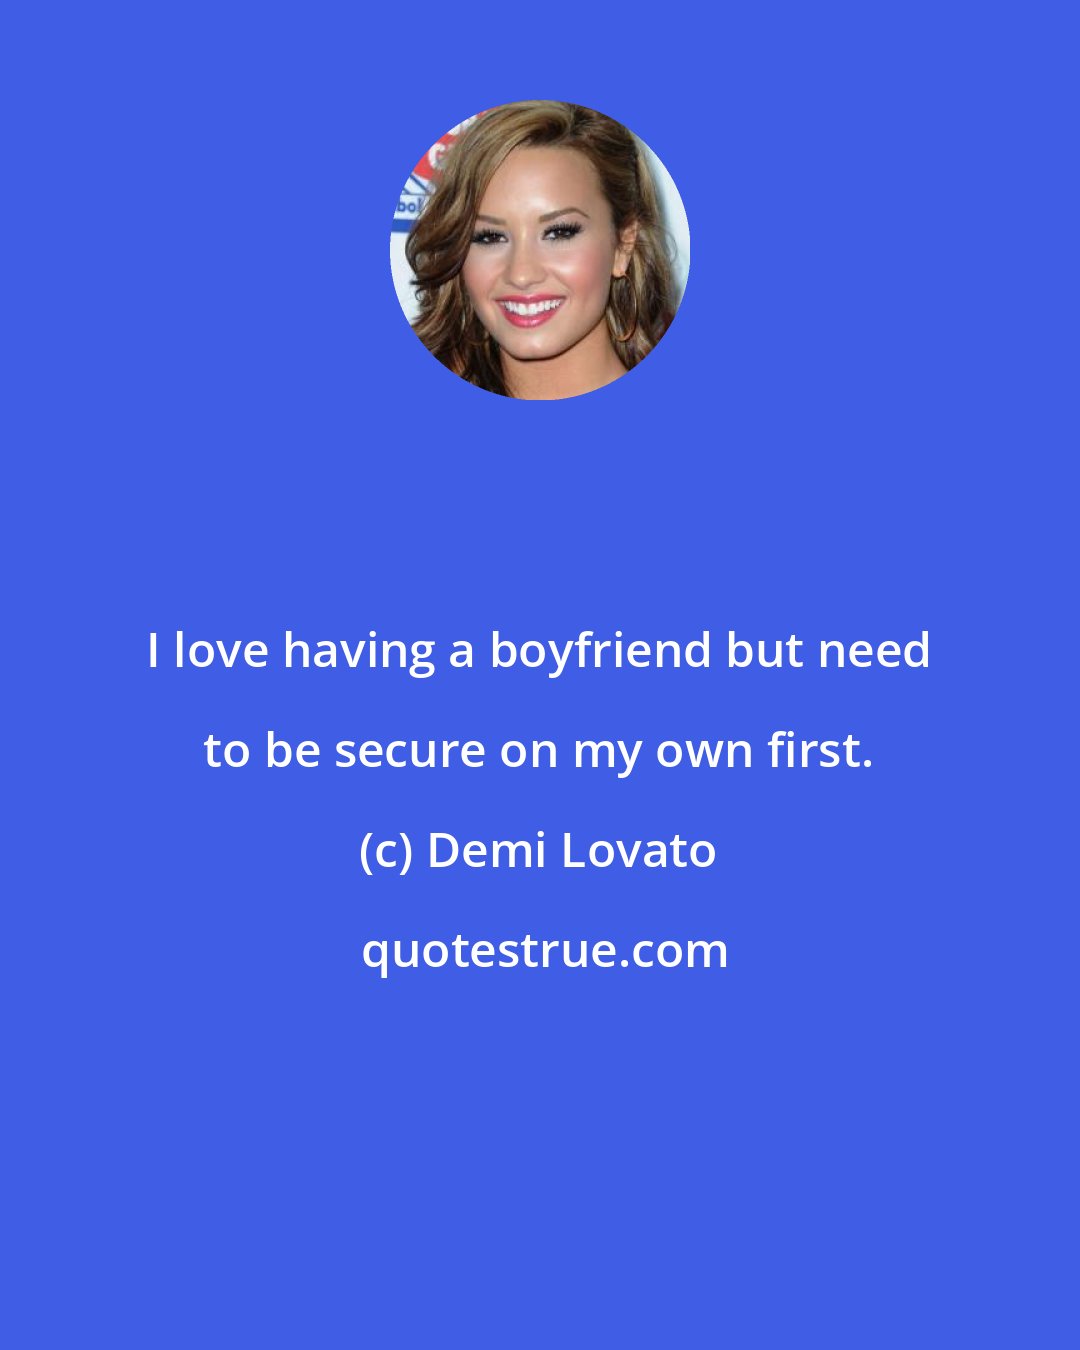 Demi Lovato: I love having a boyfriend but need to be secure on my own first.